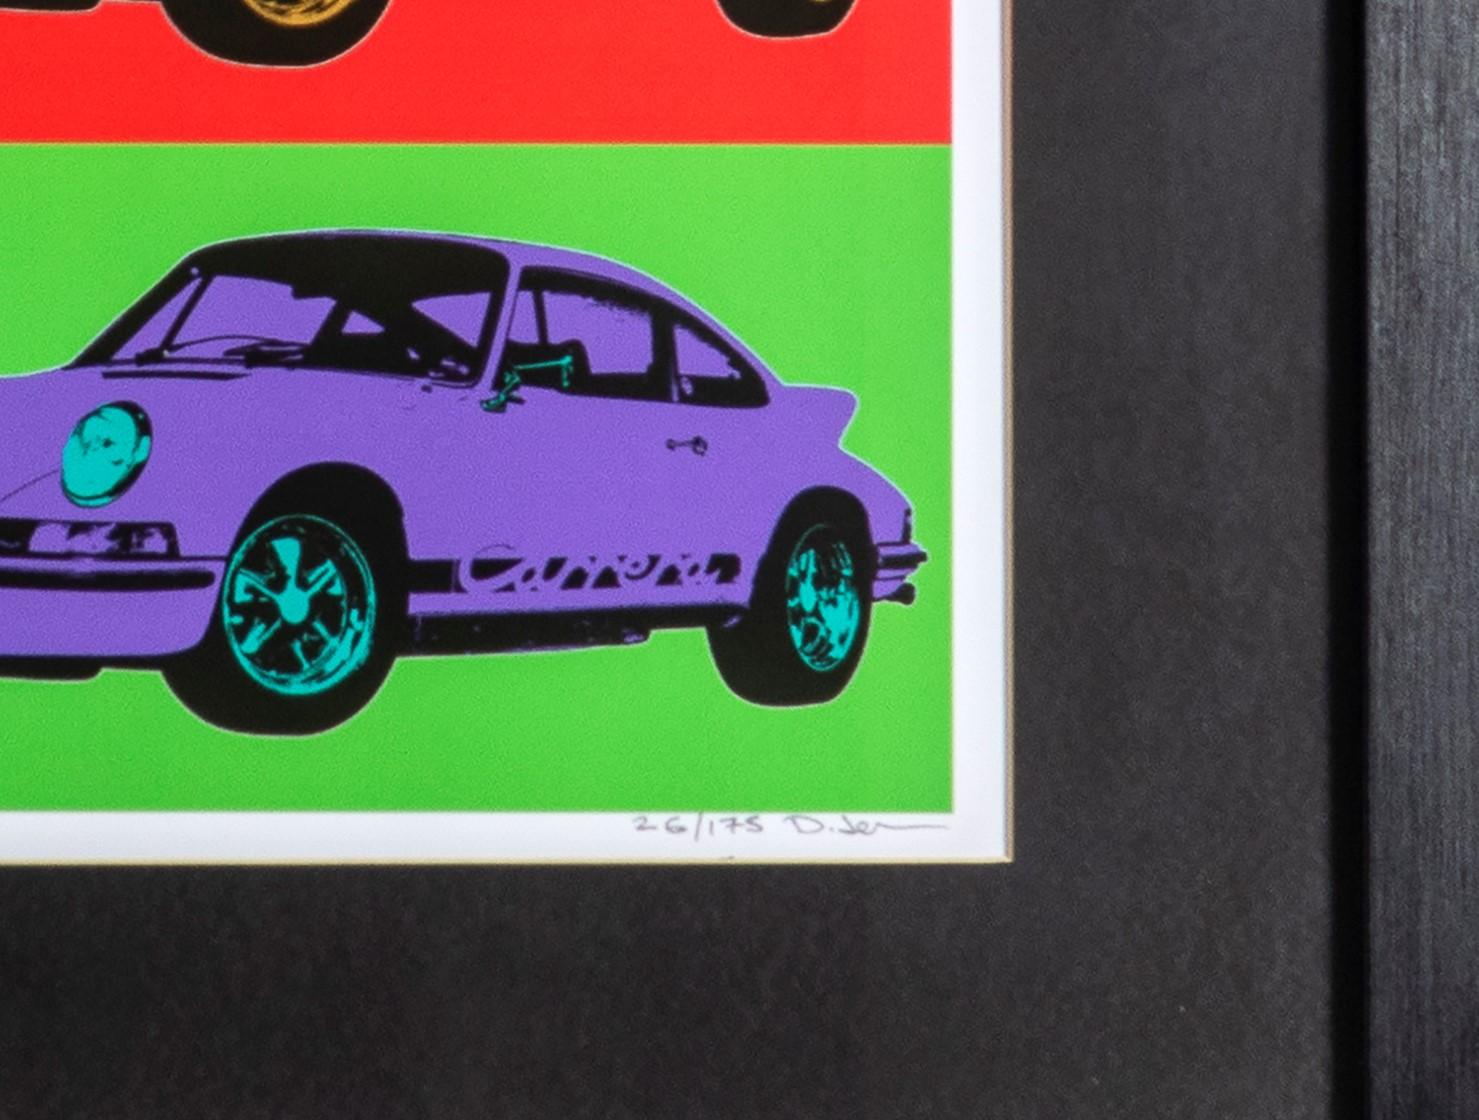 The iconic Porsche 911 RS 1973, pop art print in the style of Andy Warhol.
Vibrant wall art, a great addition to your art collection.
Probably 1980s, these are signed limited edition prints but the artist is unknown.
Prints are framed in black